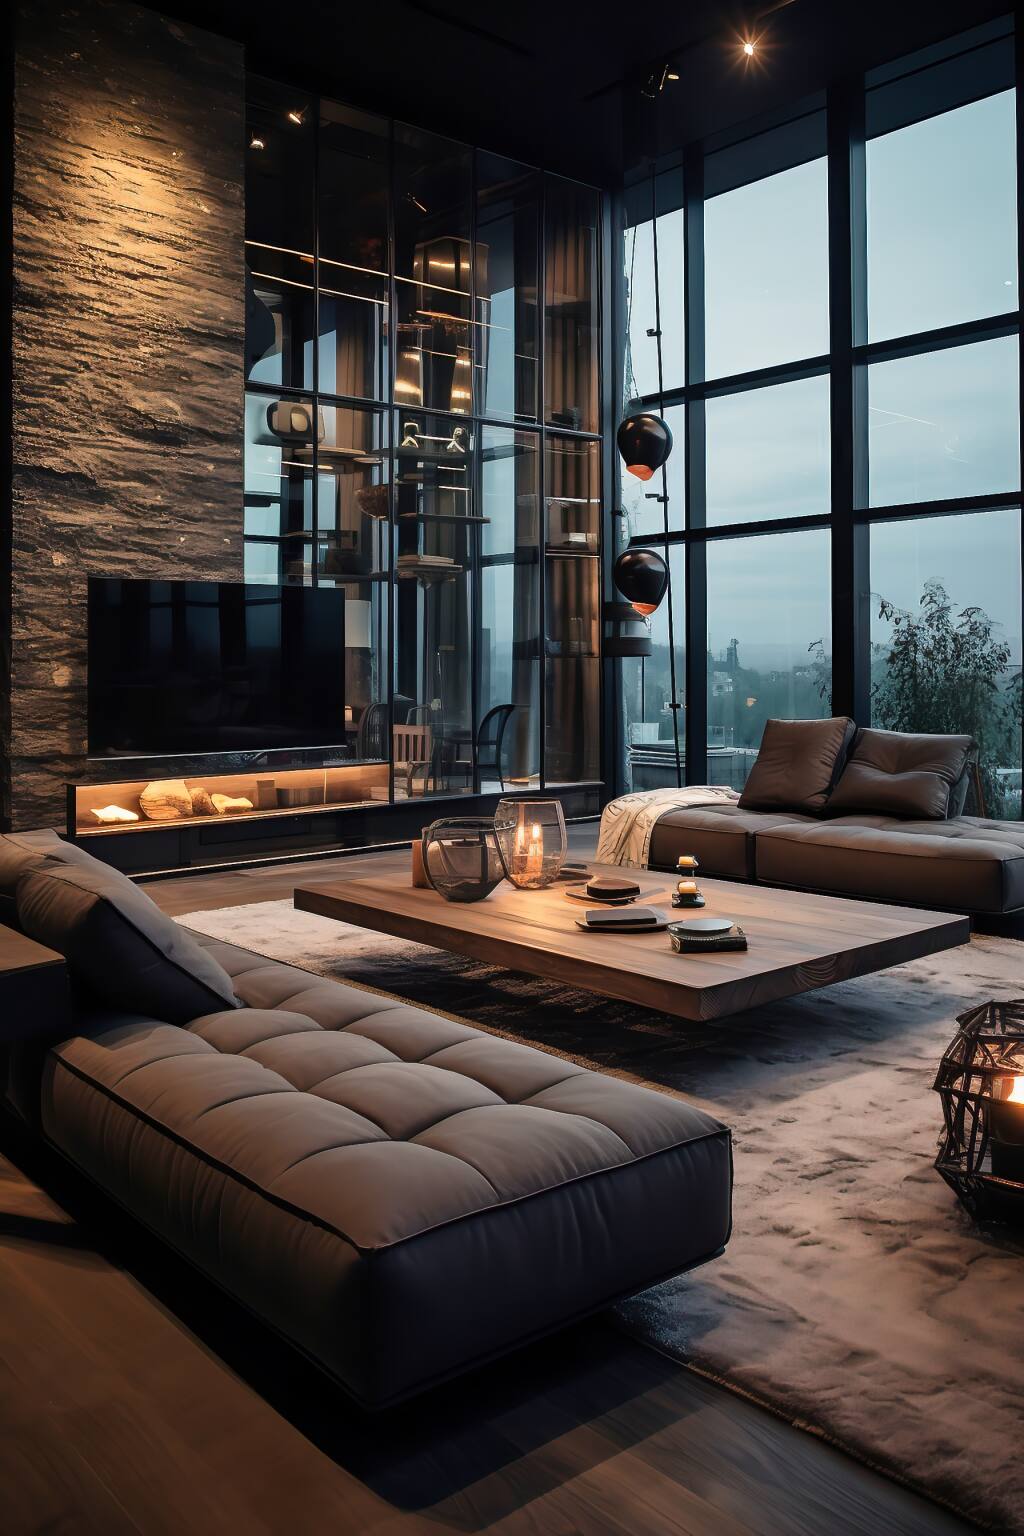 Luxury Living Room With Black Furniture, Copper Accessories, And Striking Marble Flooring, Combining Contemporary Design With Classic Elegance.